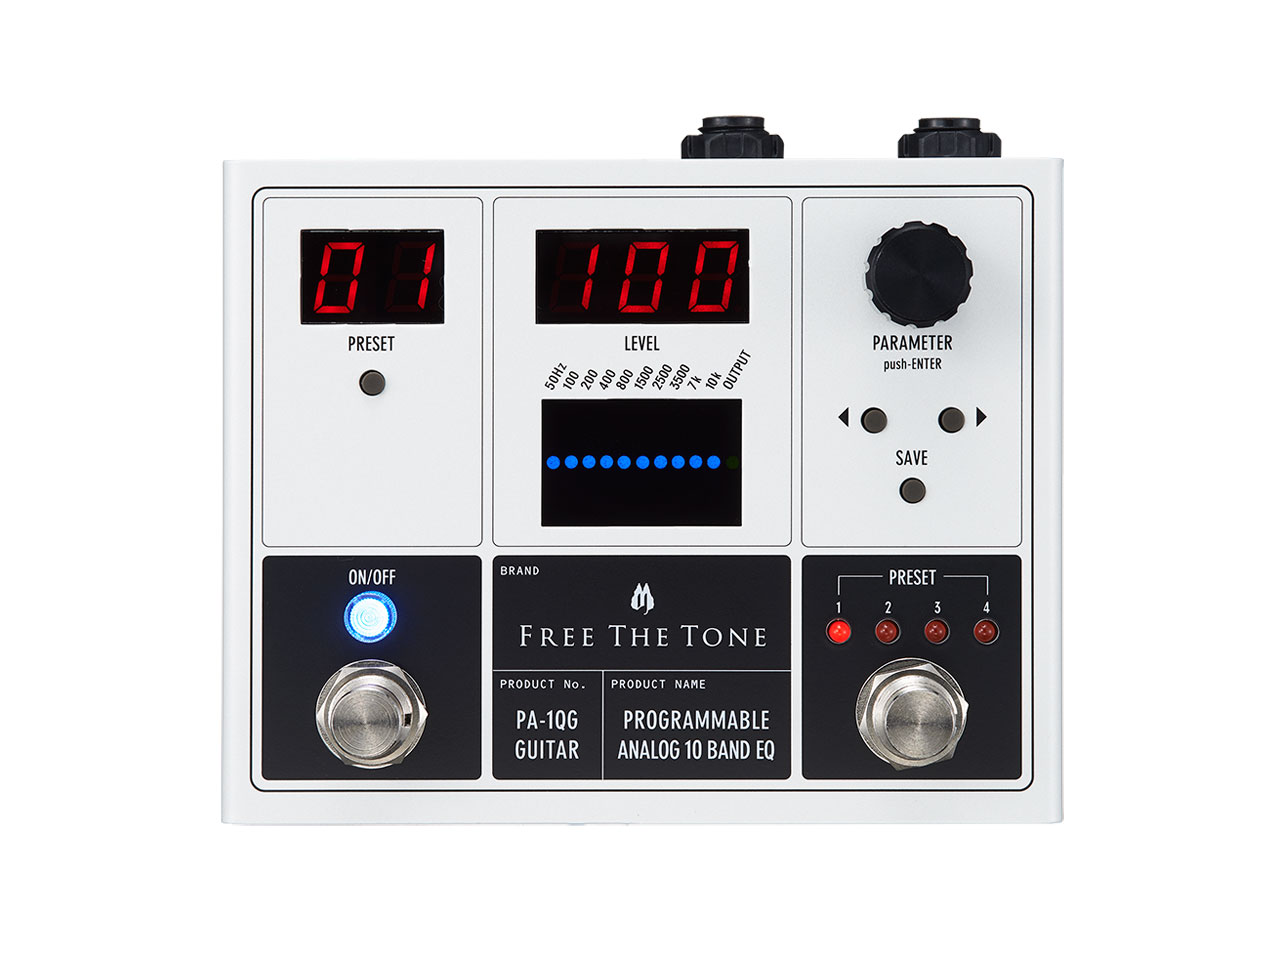 Free The Tone PROGRAMMABLE ANALOG 10 BAND EQ PA-1QG<br>(イコライザー)(フリーザトーン) 駅前店